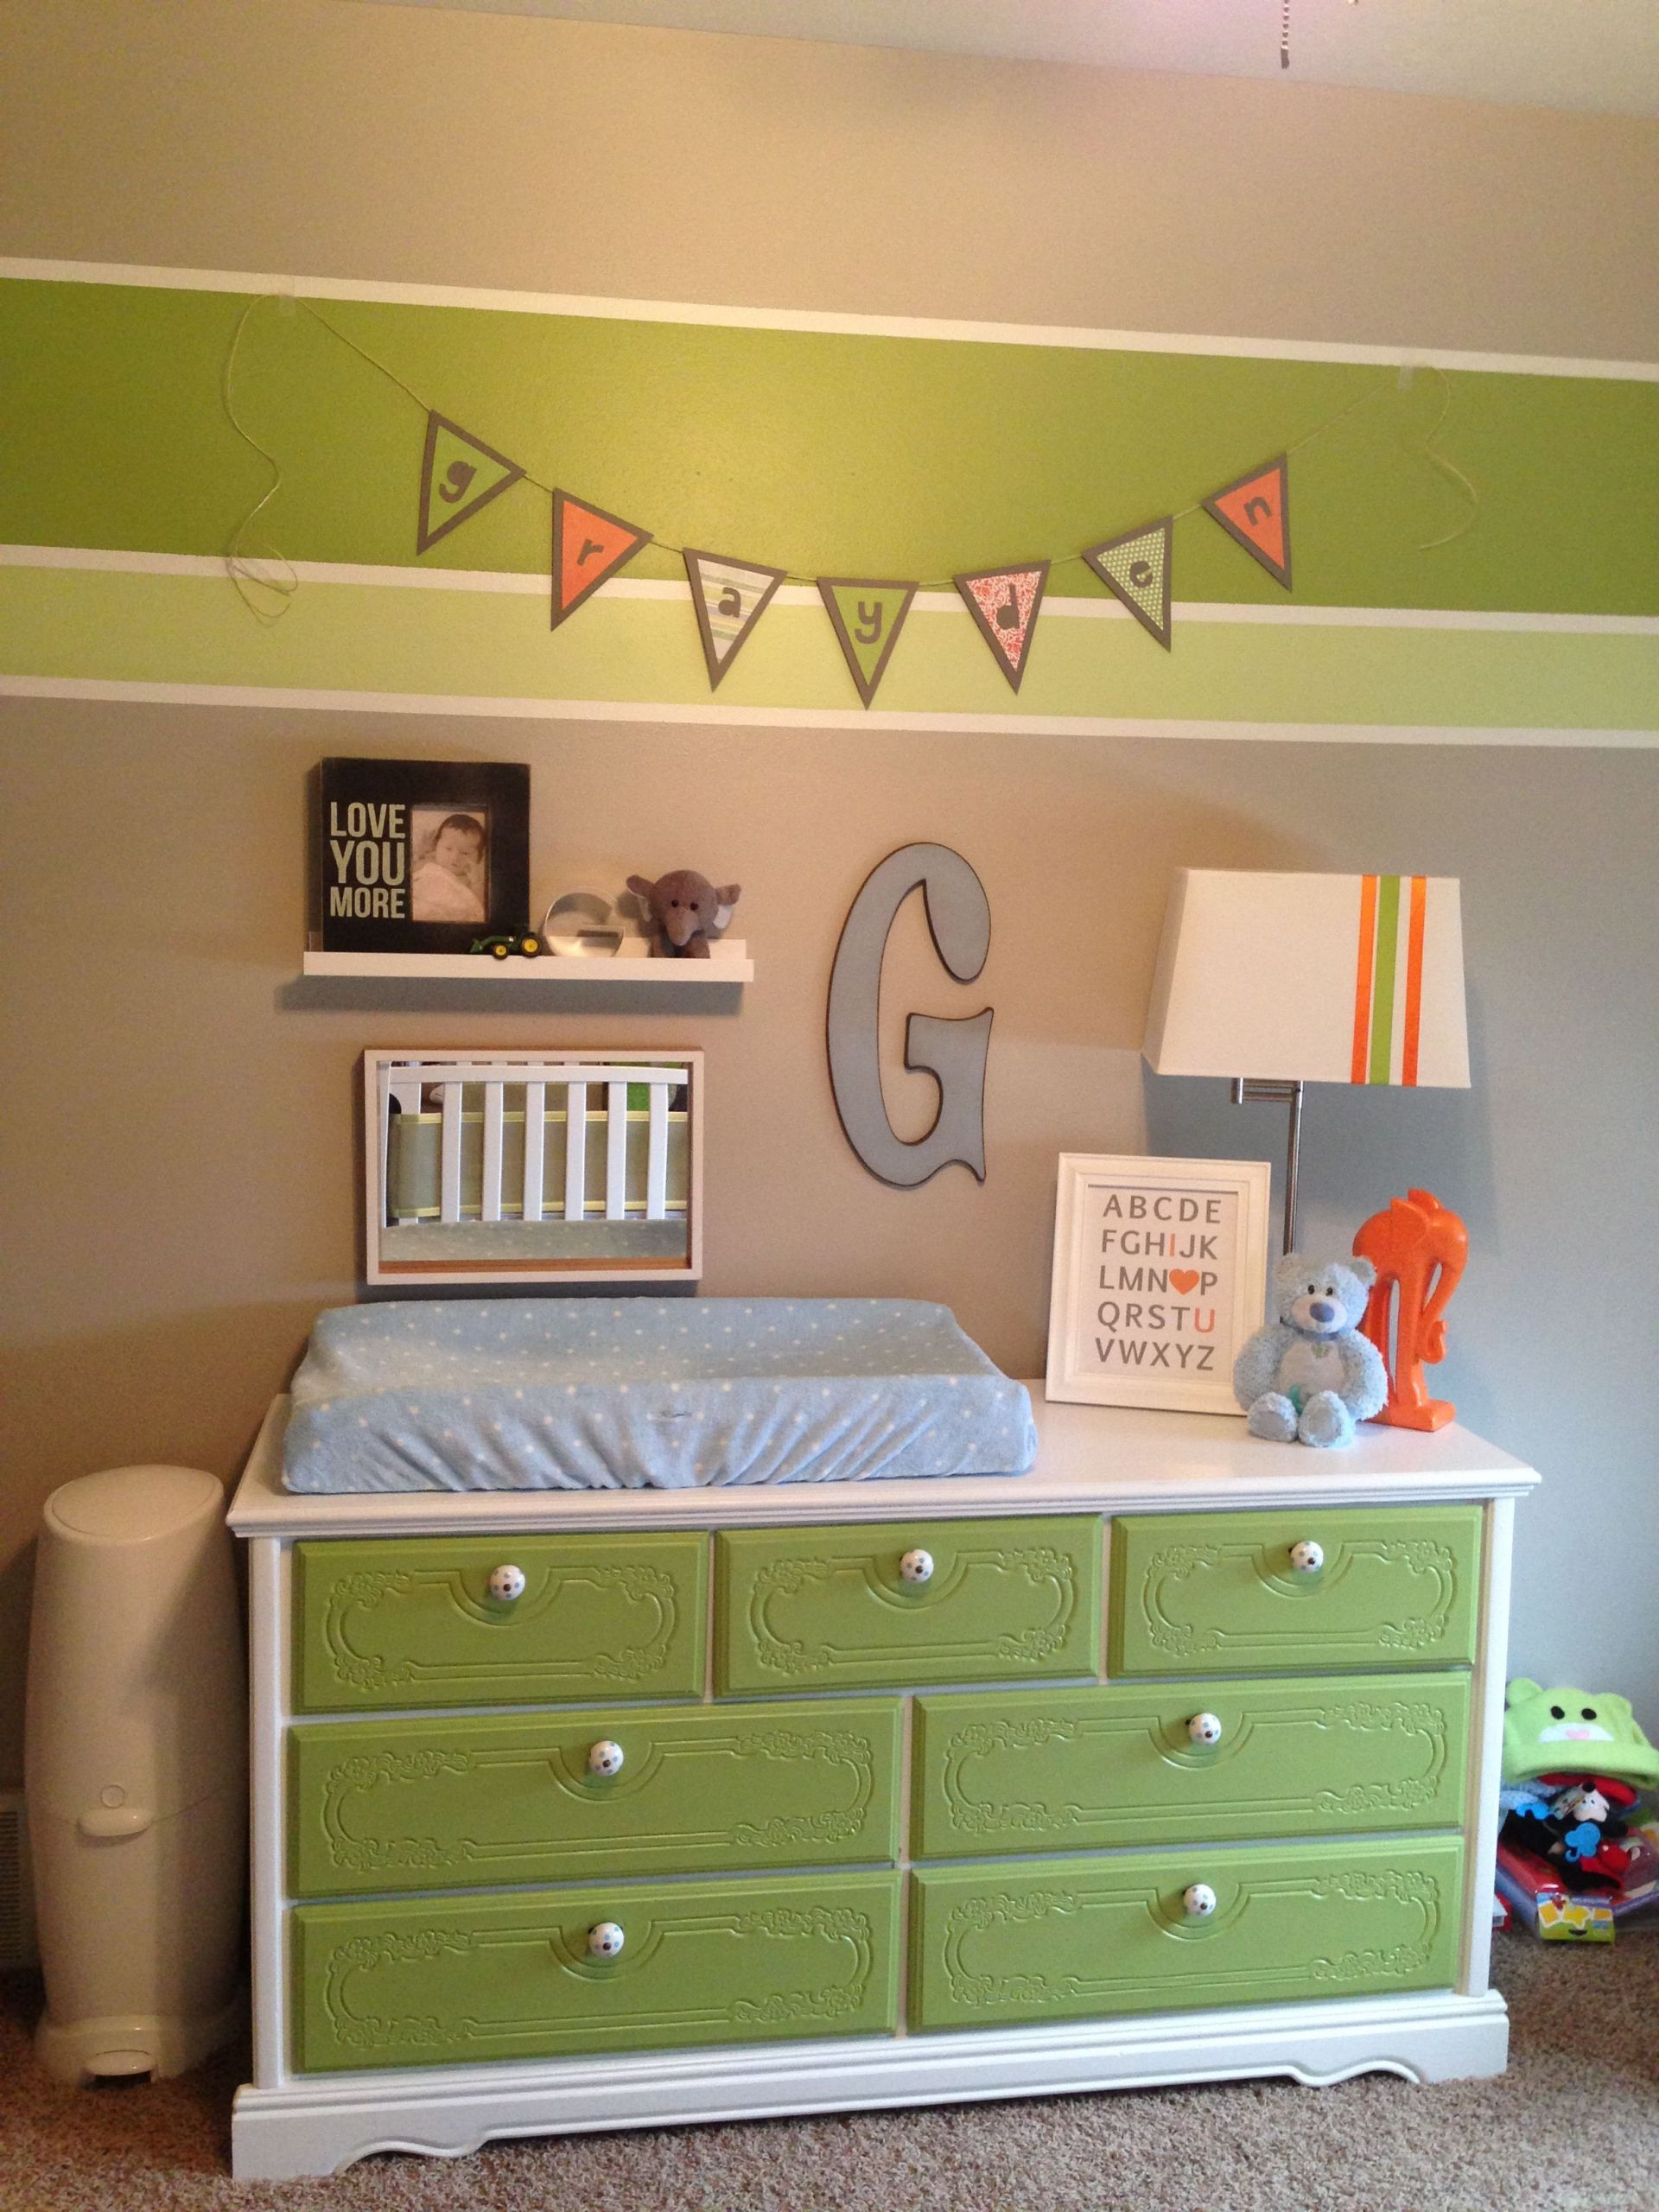 DIY Baby Changing Table
 DIY changing table this is what I want to do with my